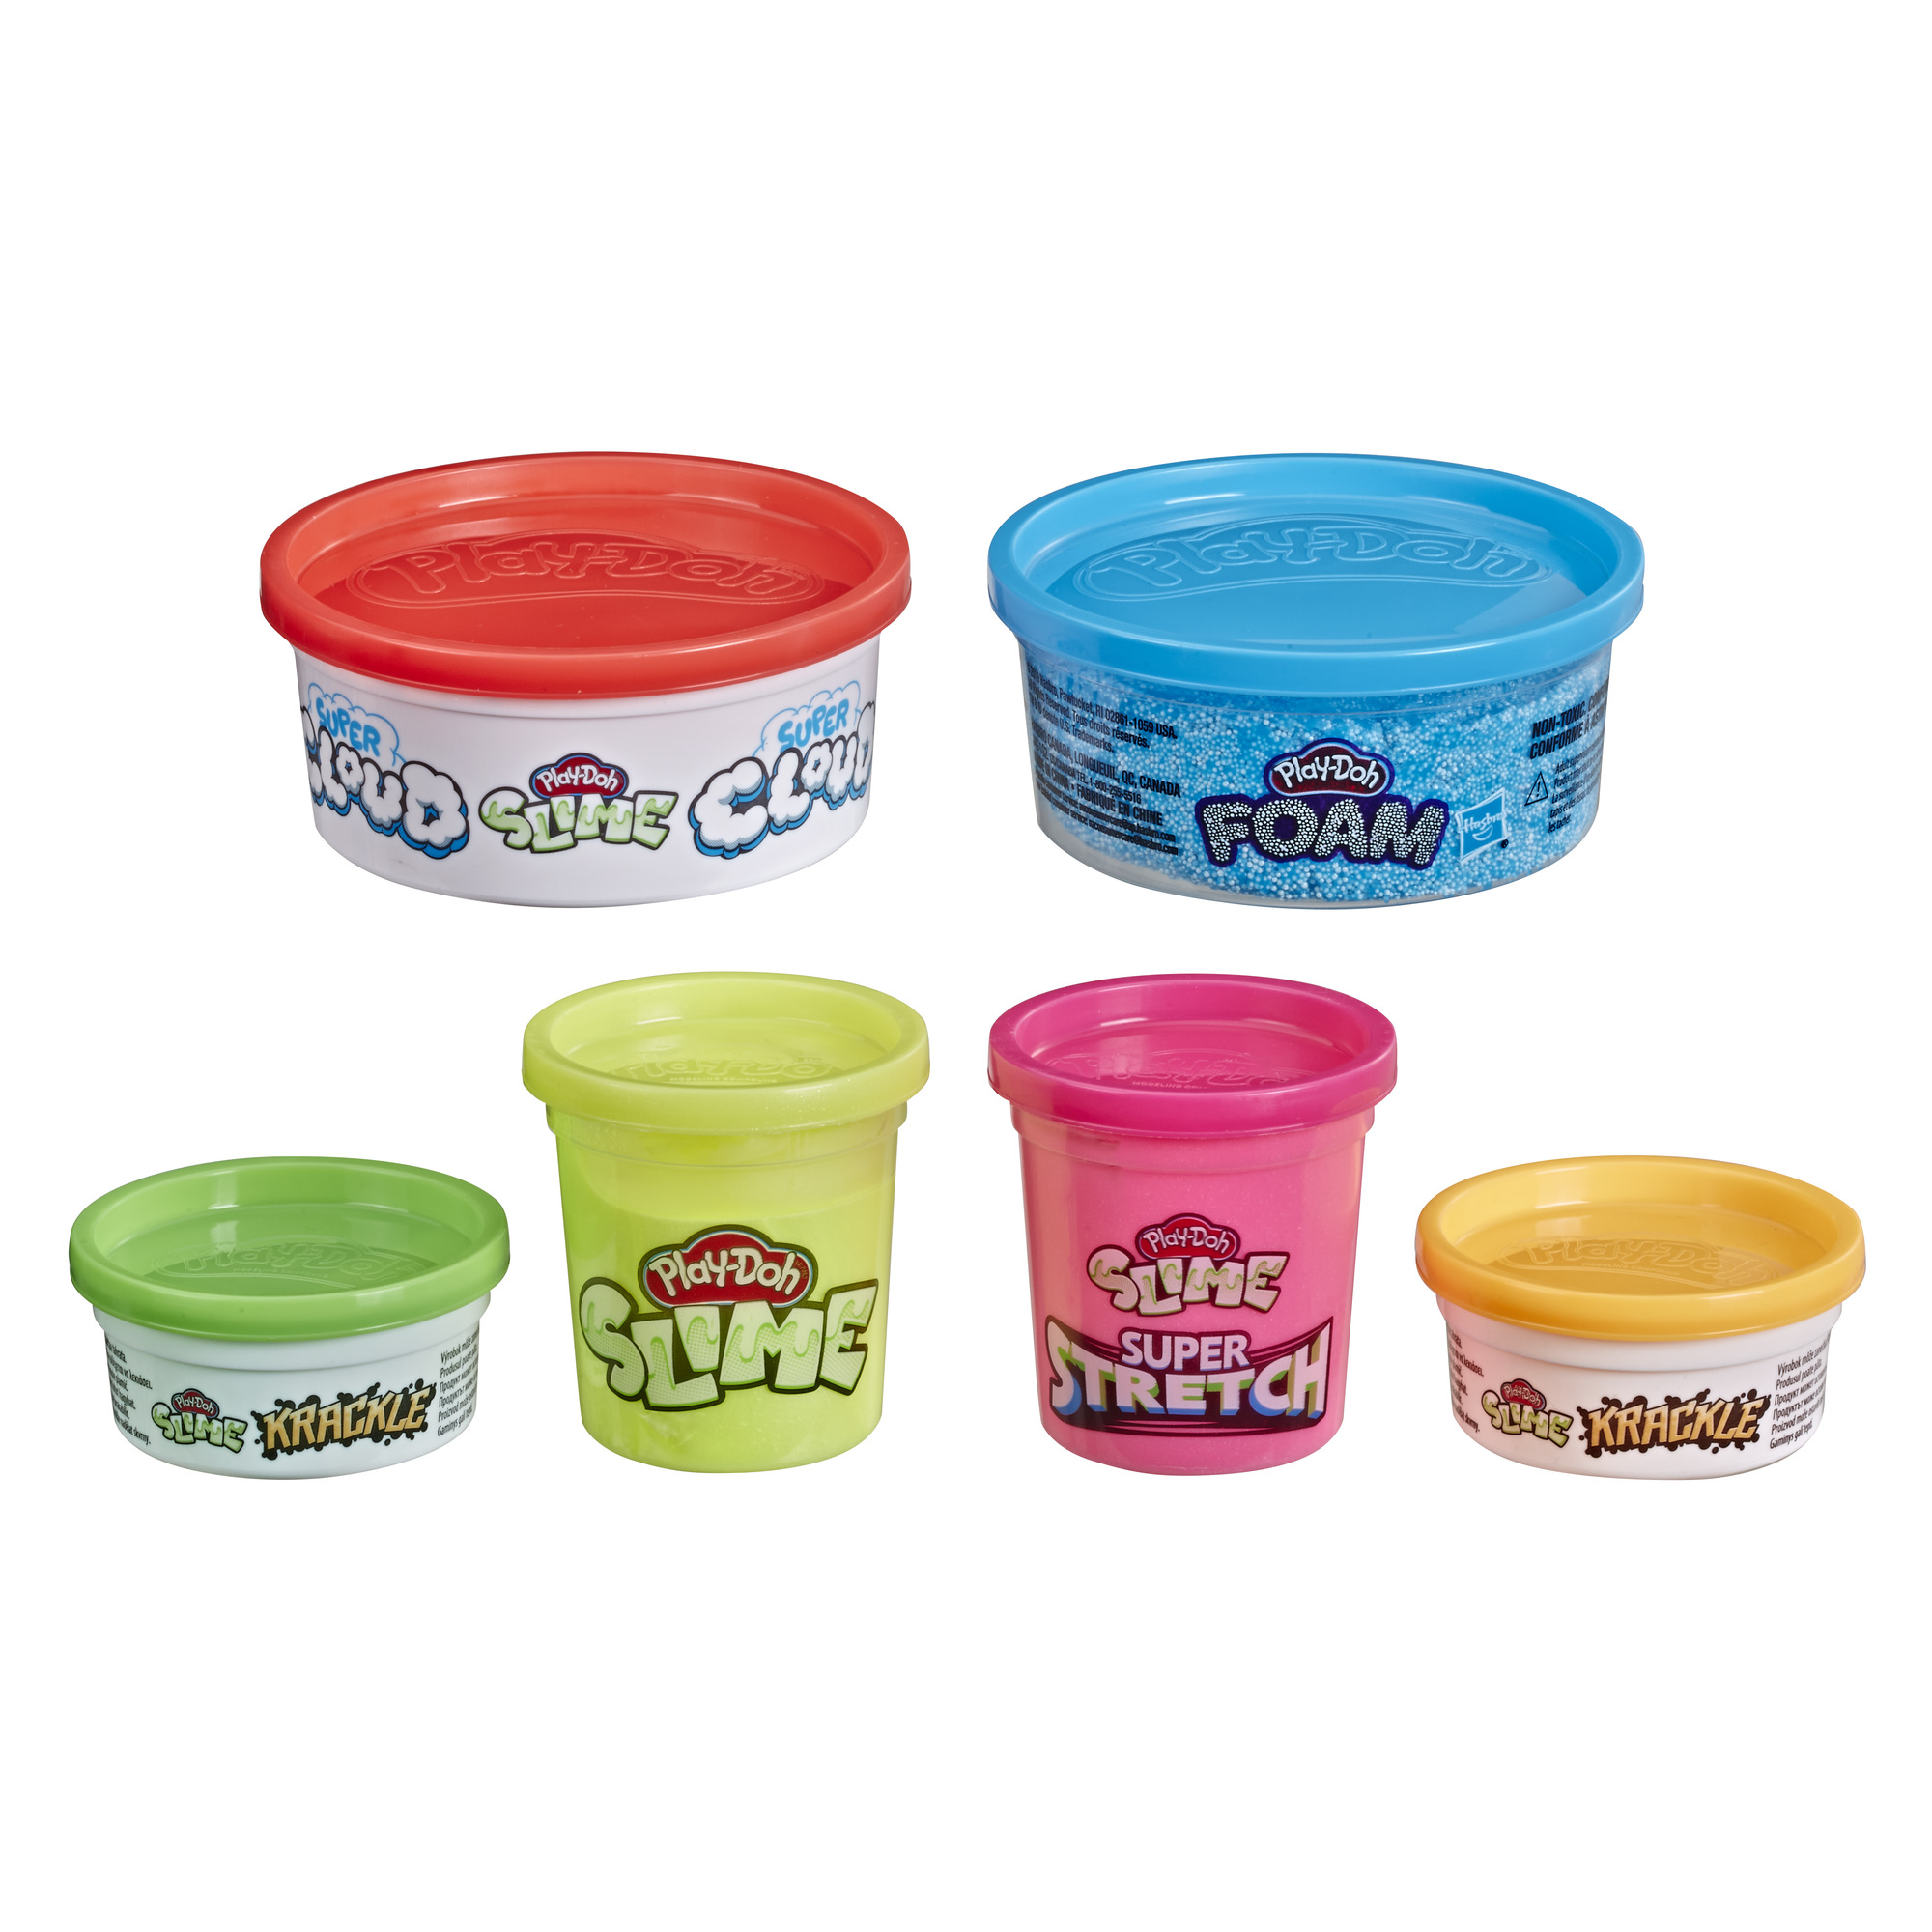 Play-Doh Specialty Compounds - image 1 of 2